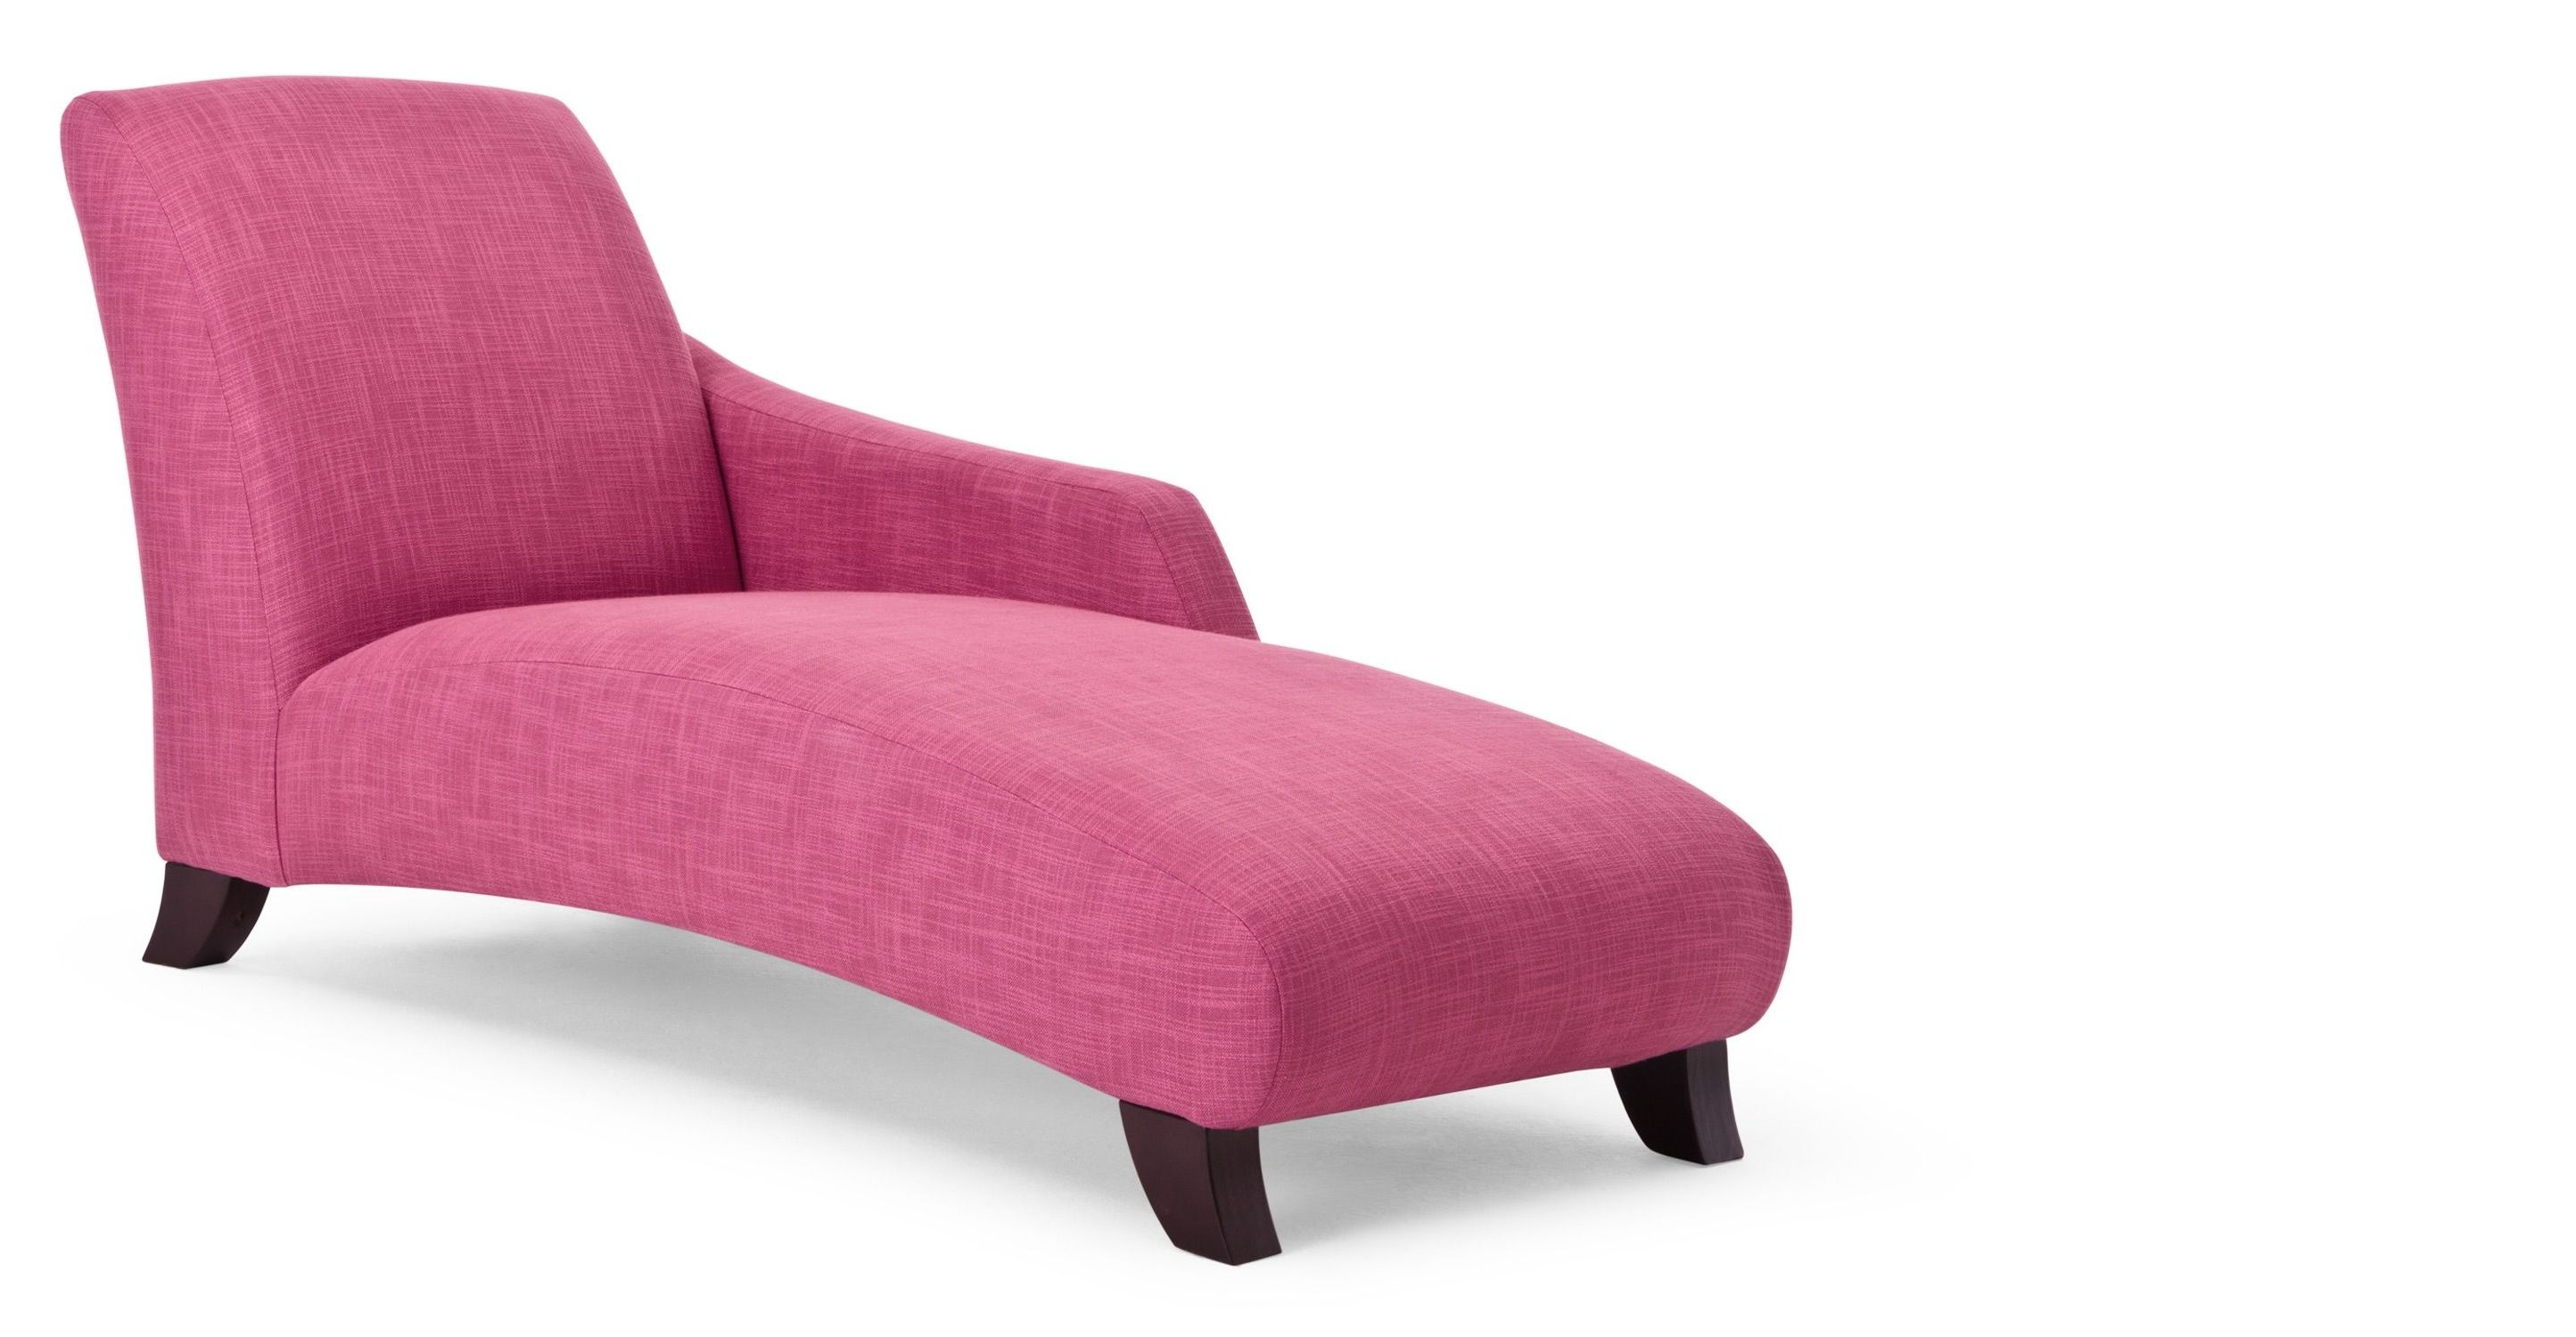 Preferred Pink Bedroom Chaise Lounge Chair Best Sectional Sofa Reviews In Pink Chaises (View 5 of 15)